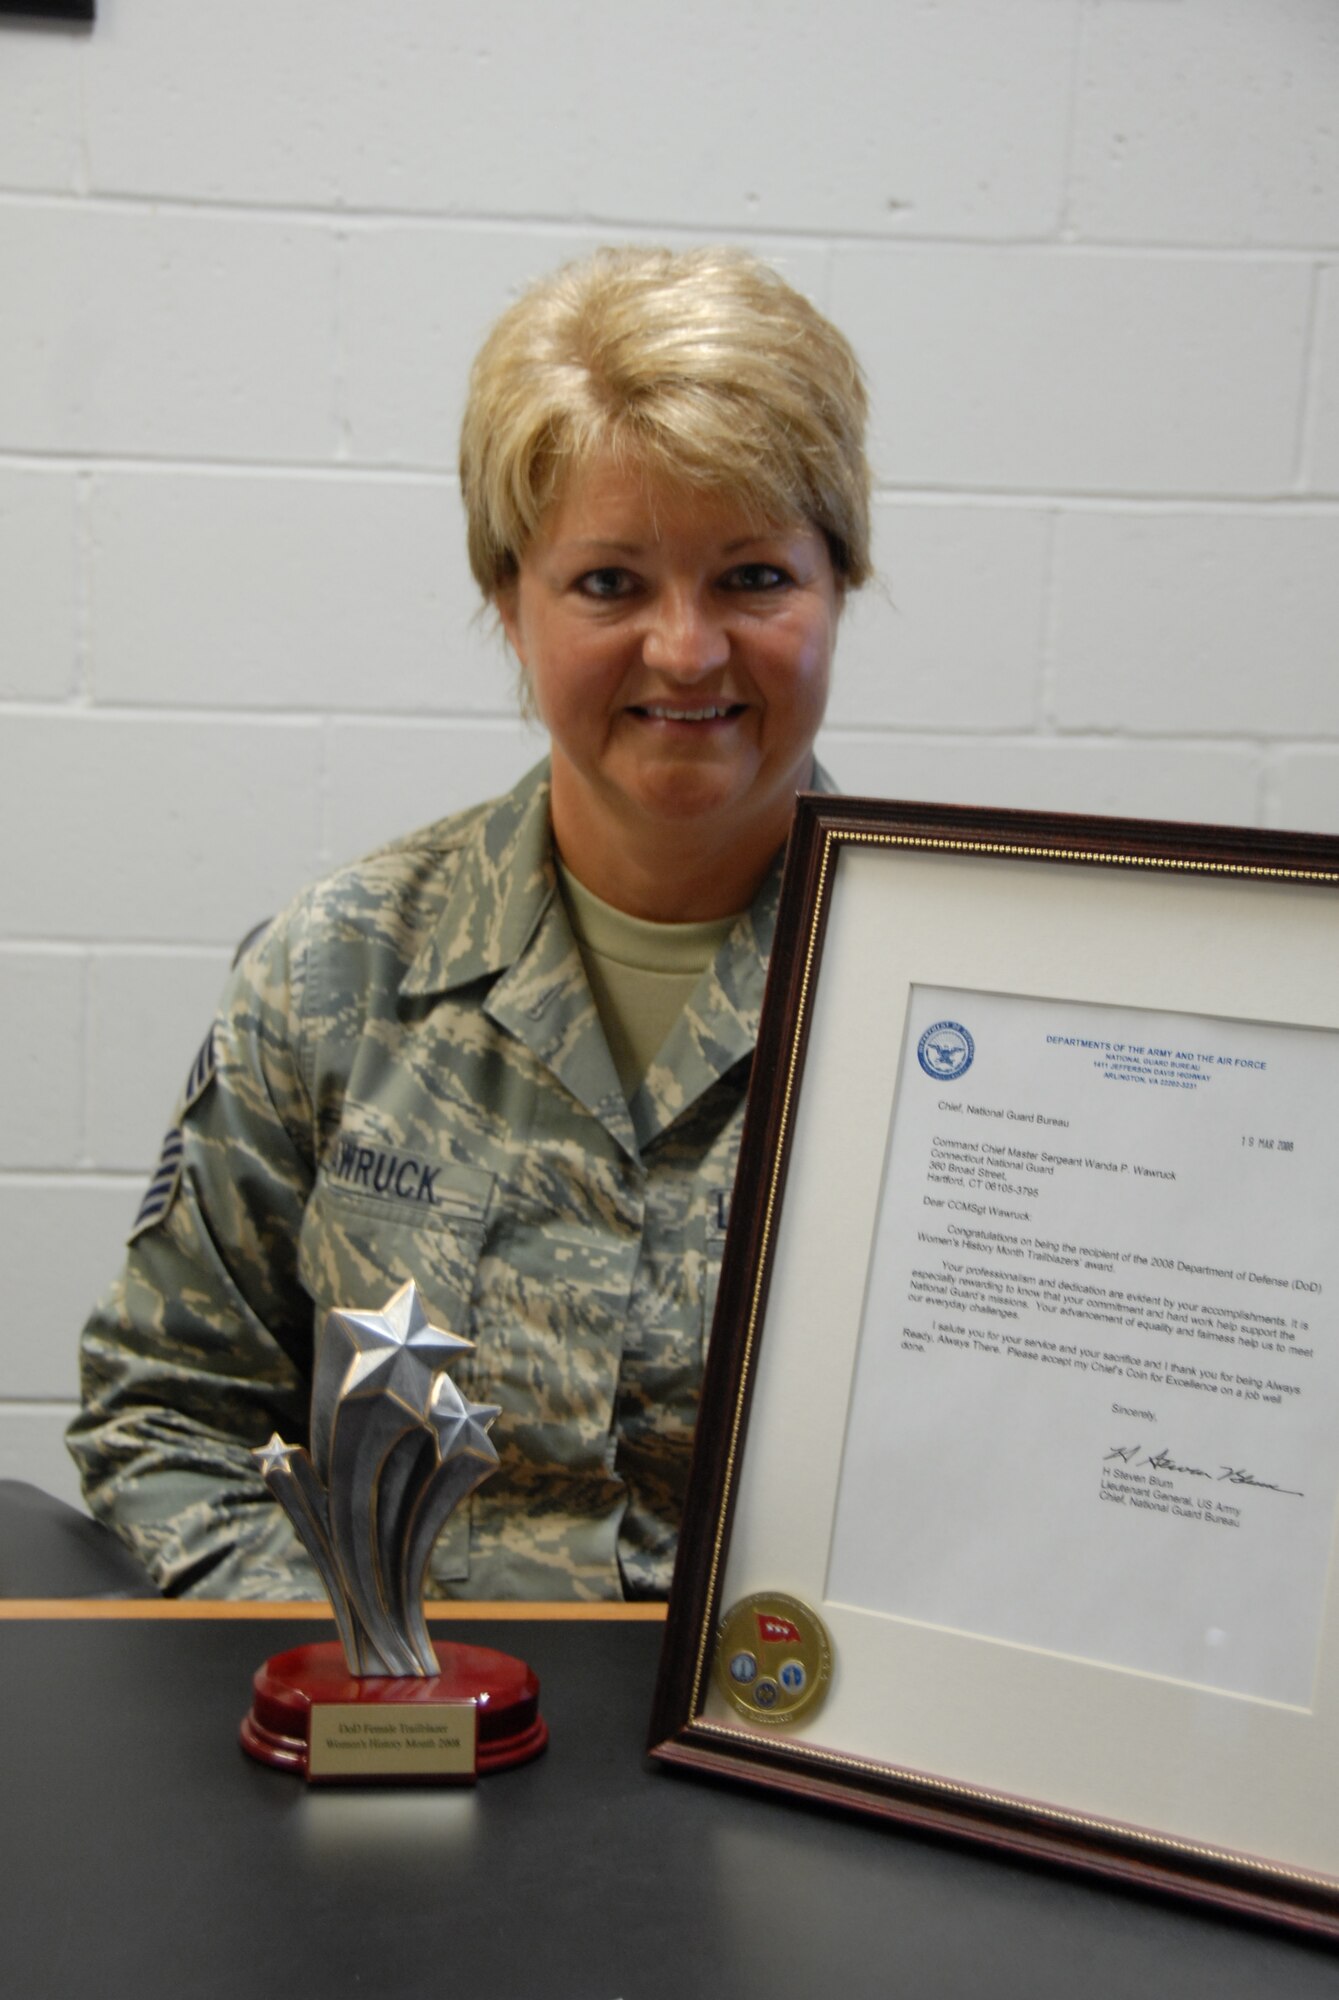 Chief  Master Sgt. Wanda Wawruck, 103rd Airlift Wing personnel superintendant, proudly displays the Department of Defense Trailblazer Award September 17, 2008, at the Bradley Air National Guard Base, East Granby, Connecticut.  Wawruck was formally recognized for her exceptional career achievements and presented the award during a March 2008 reception at the Women's Art Museum in Washington, D.C.  (U.S. Air Force photo by Staff Sgt. Erin McNamara) 